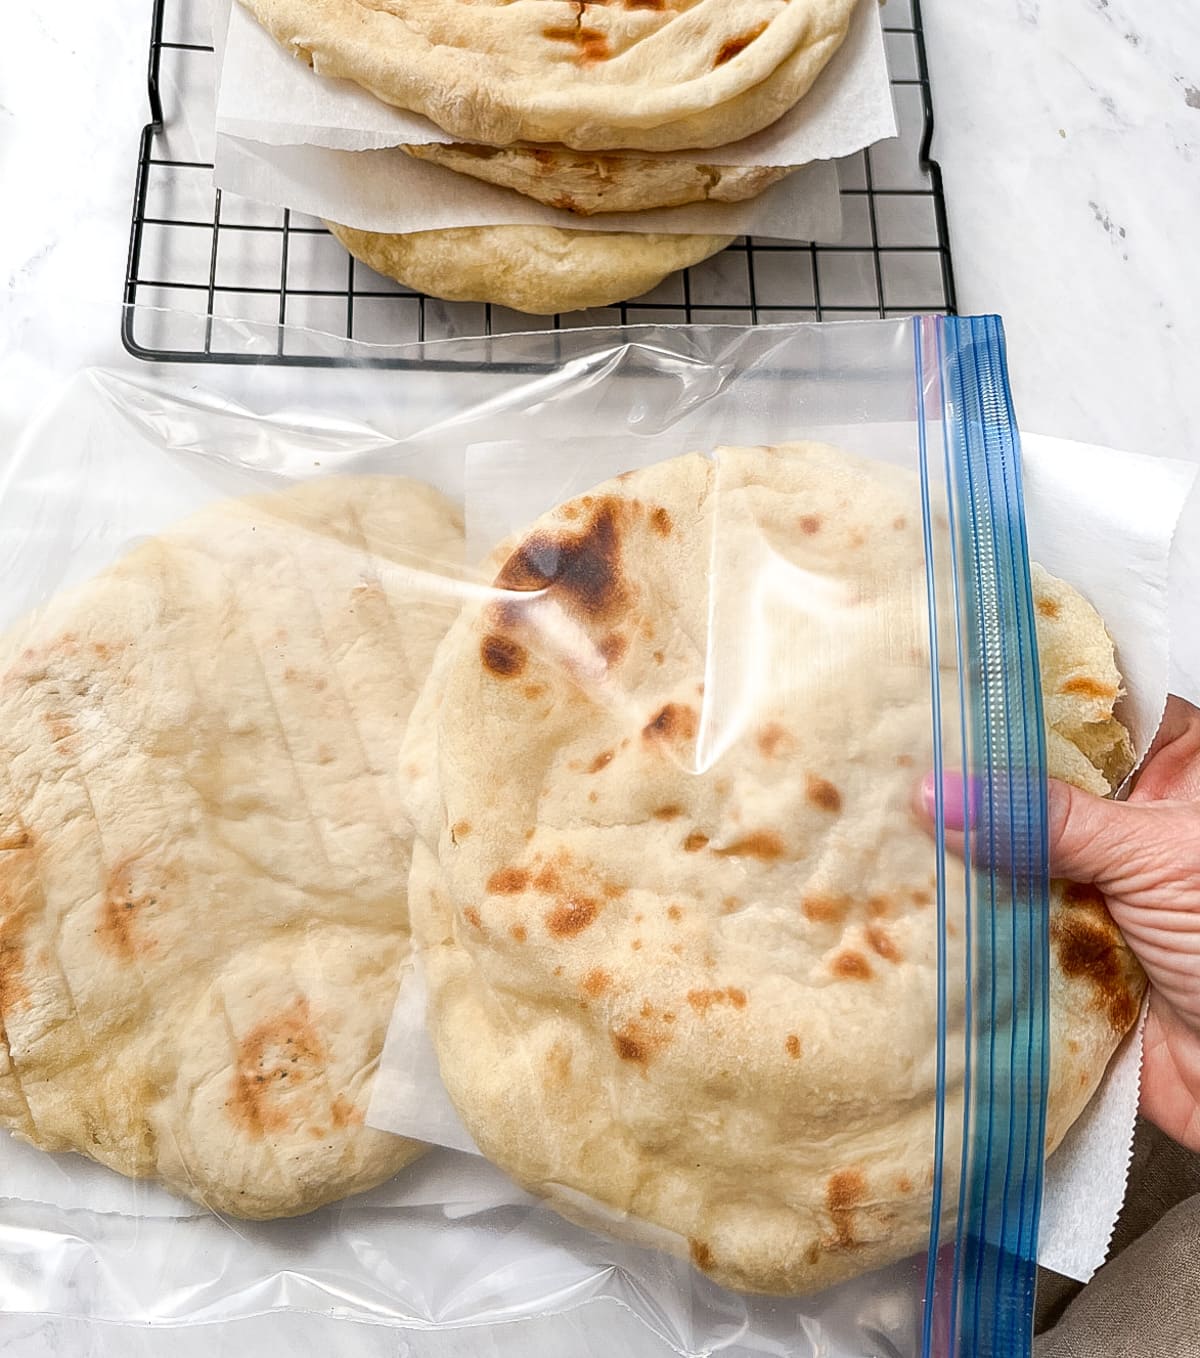 Par-baked pizza crusts in freezer bags.